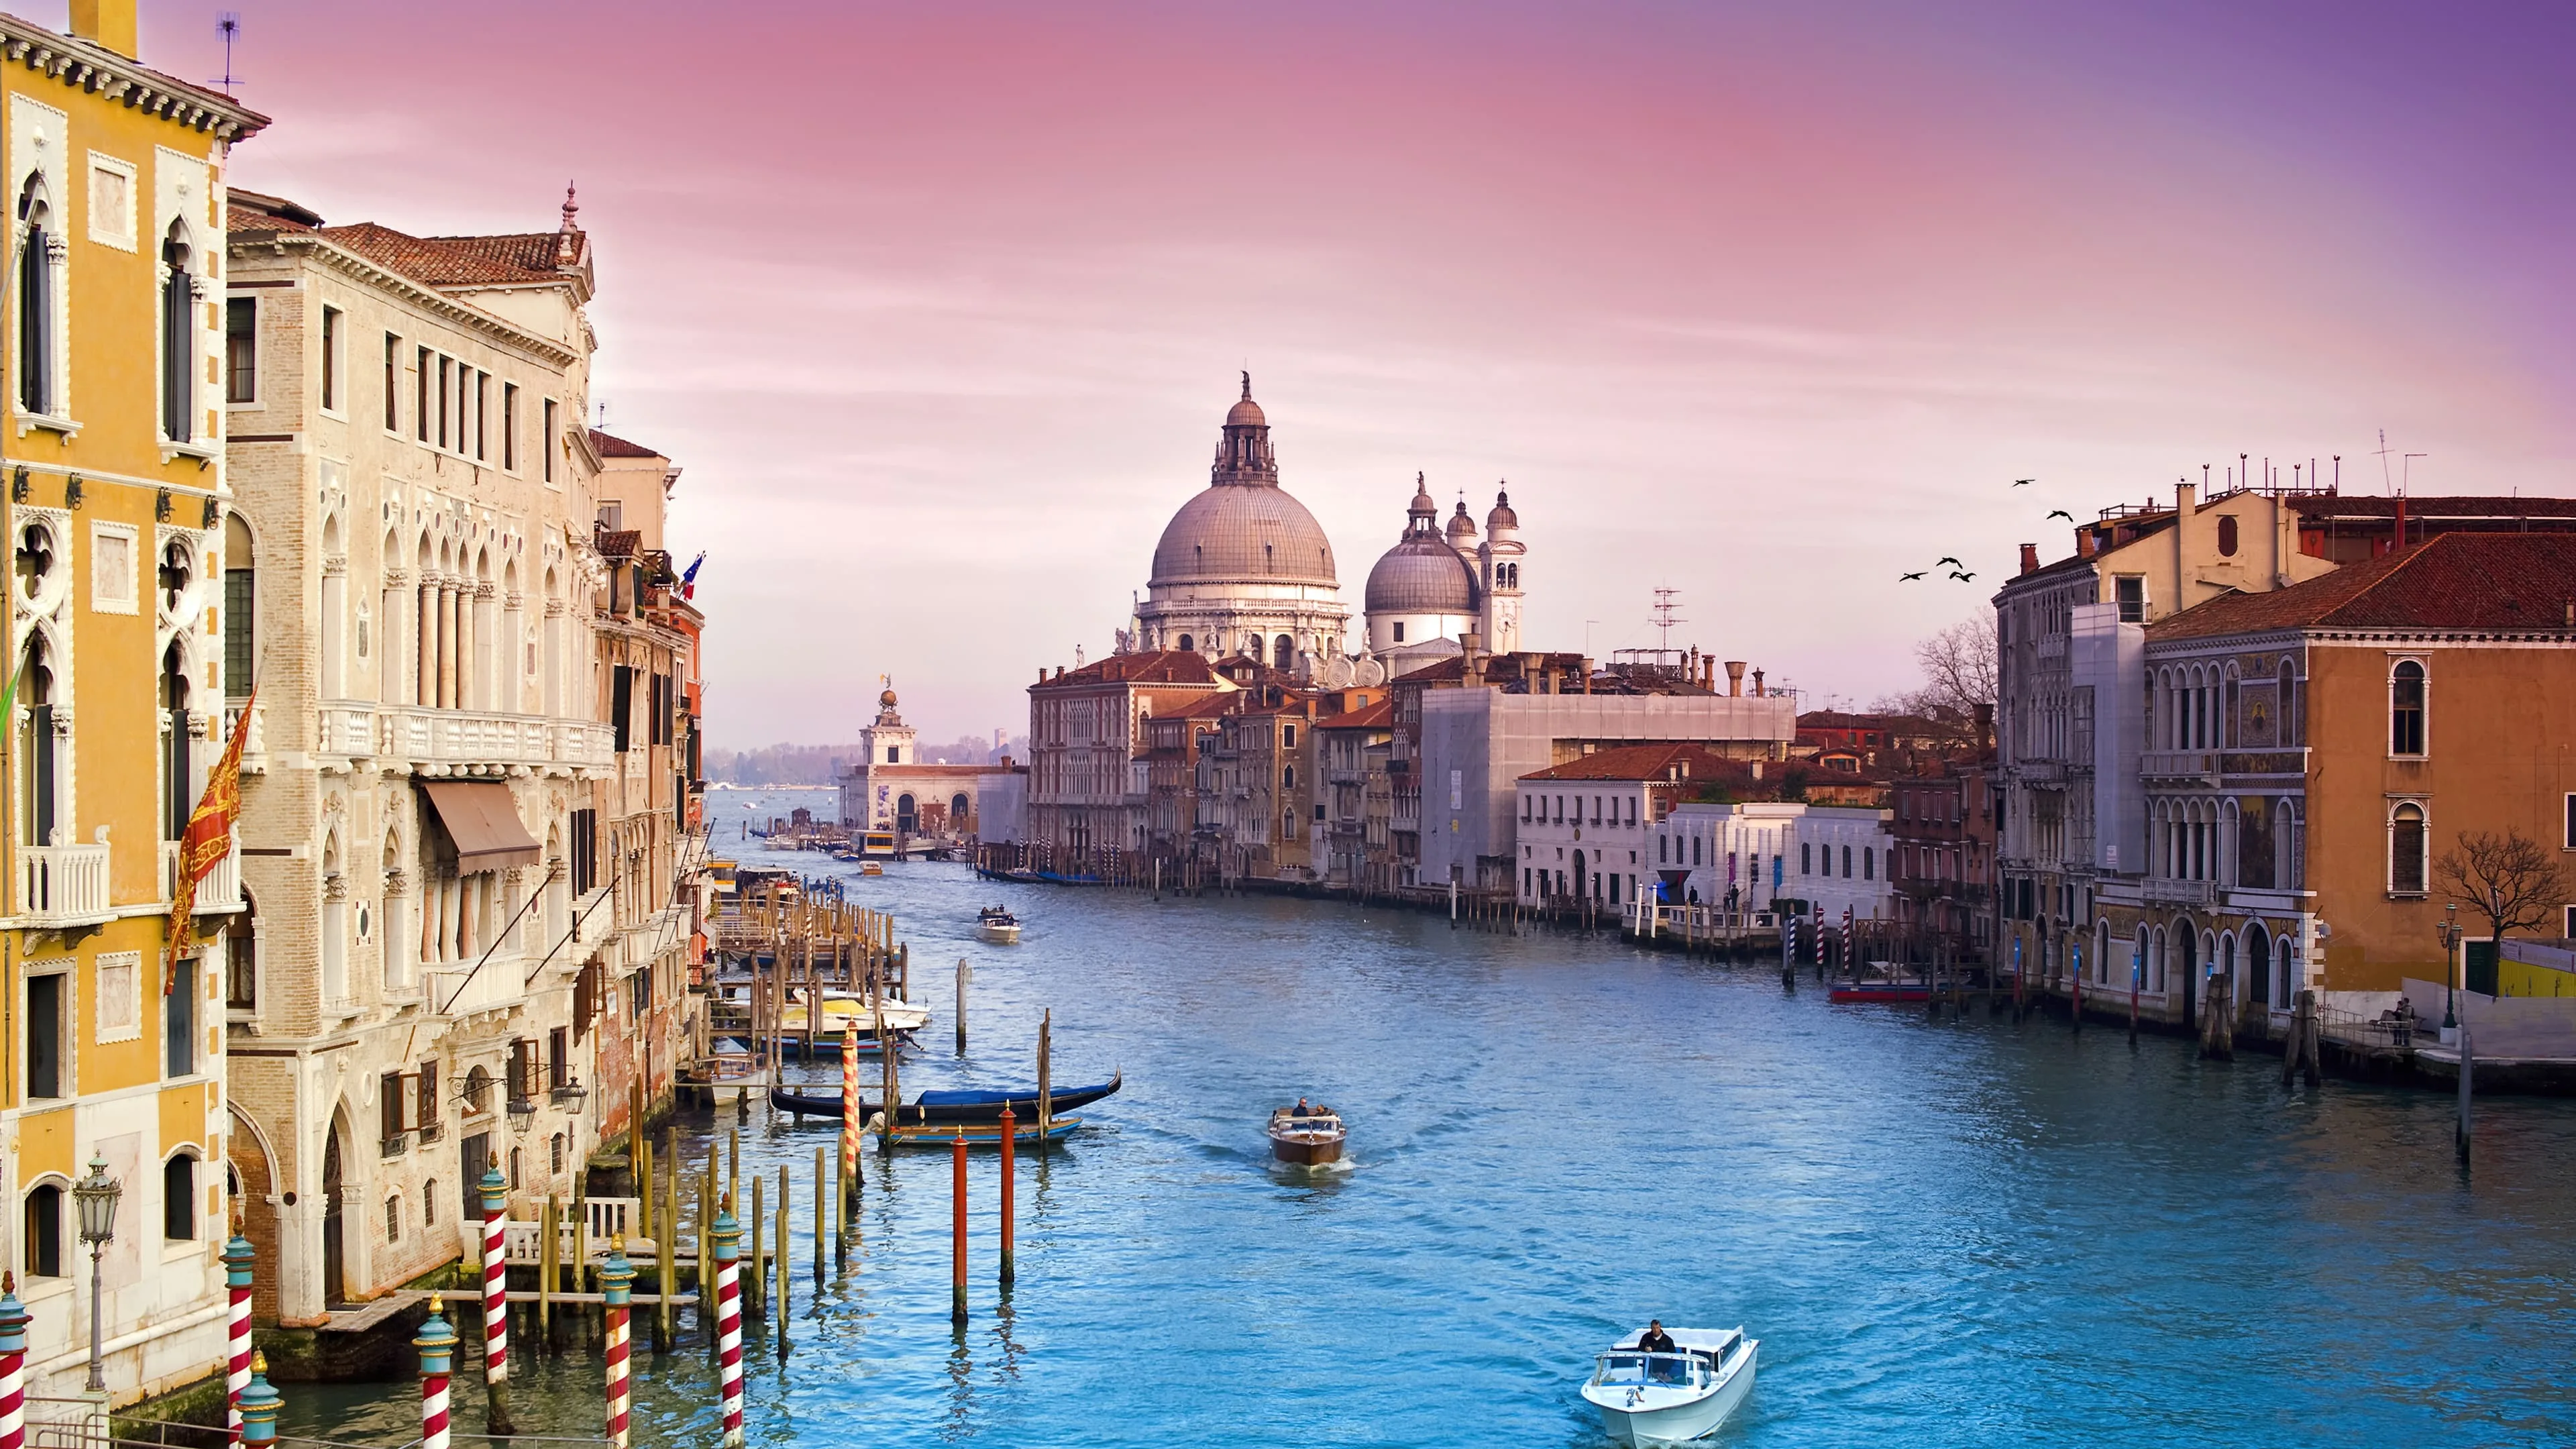 This stunning 4K wallpaper captures the beautiful cityscape of Venice, Italy. The scenery showcases the picturesque buildings and waterways that make this city a popular tourist destination.